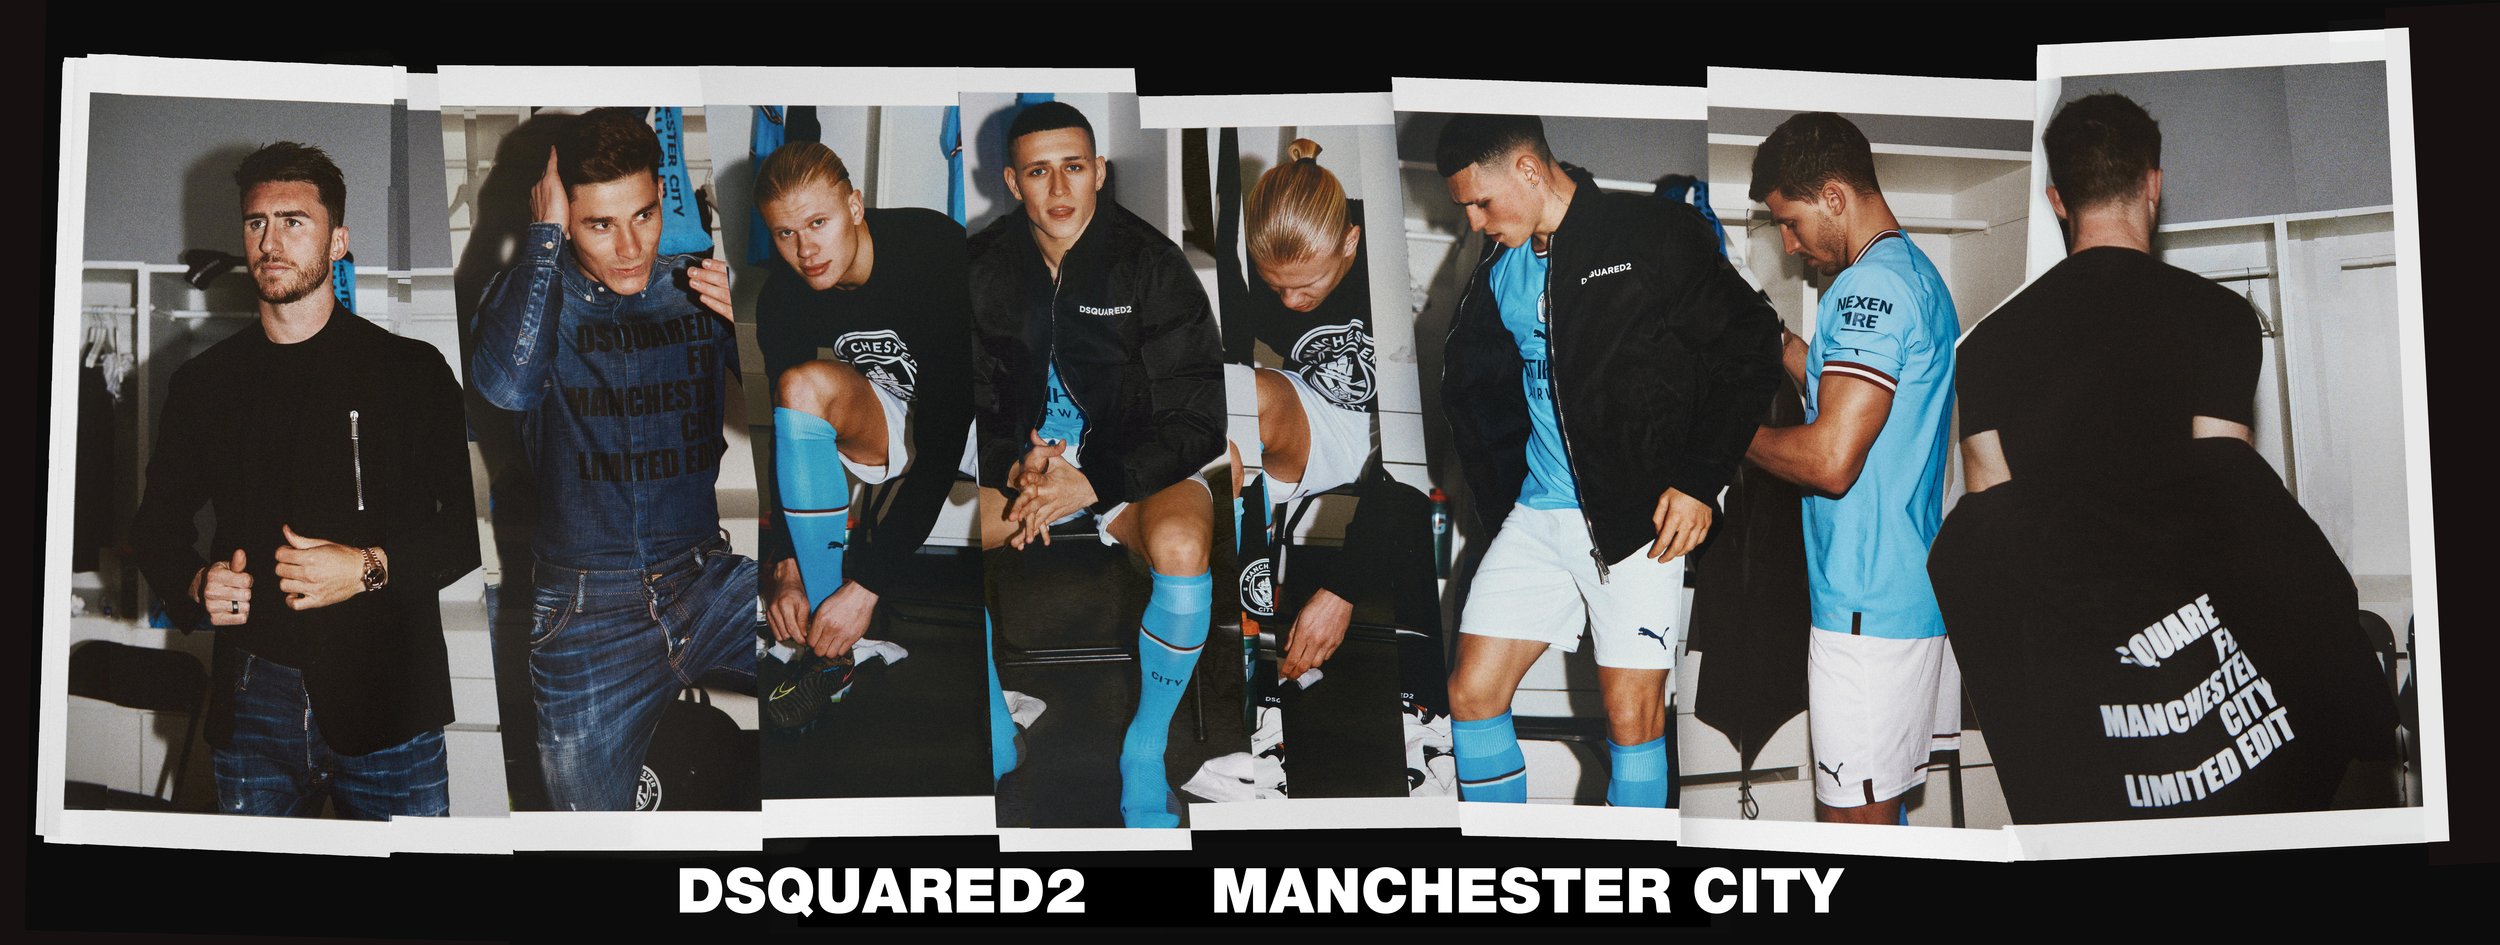 DSQUARED2 FOR MANCHESTER CITY CAPSULE COLLECTION  (2)-min.jpg